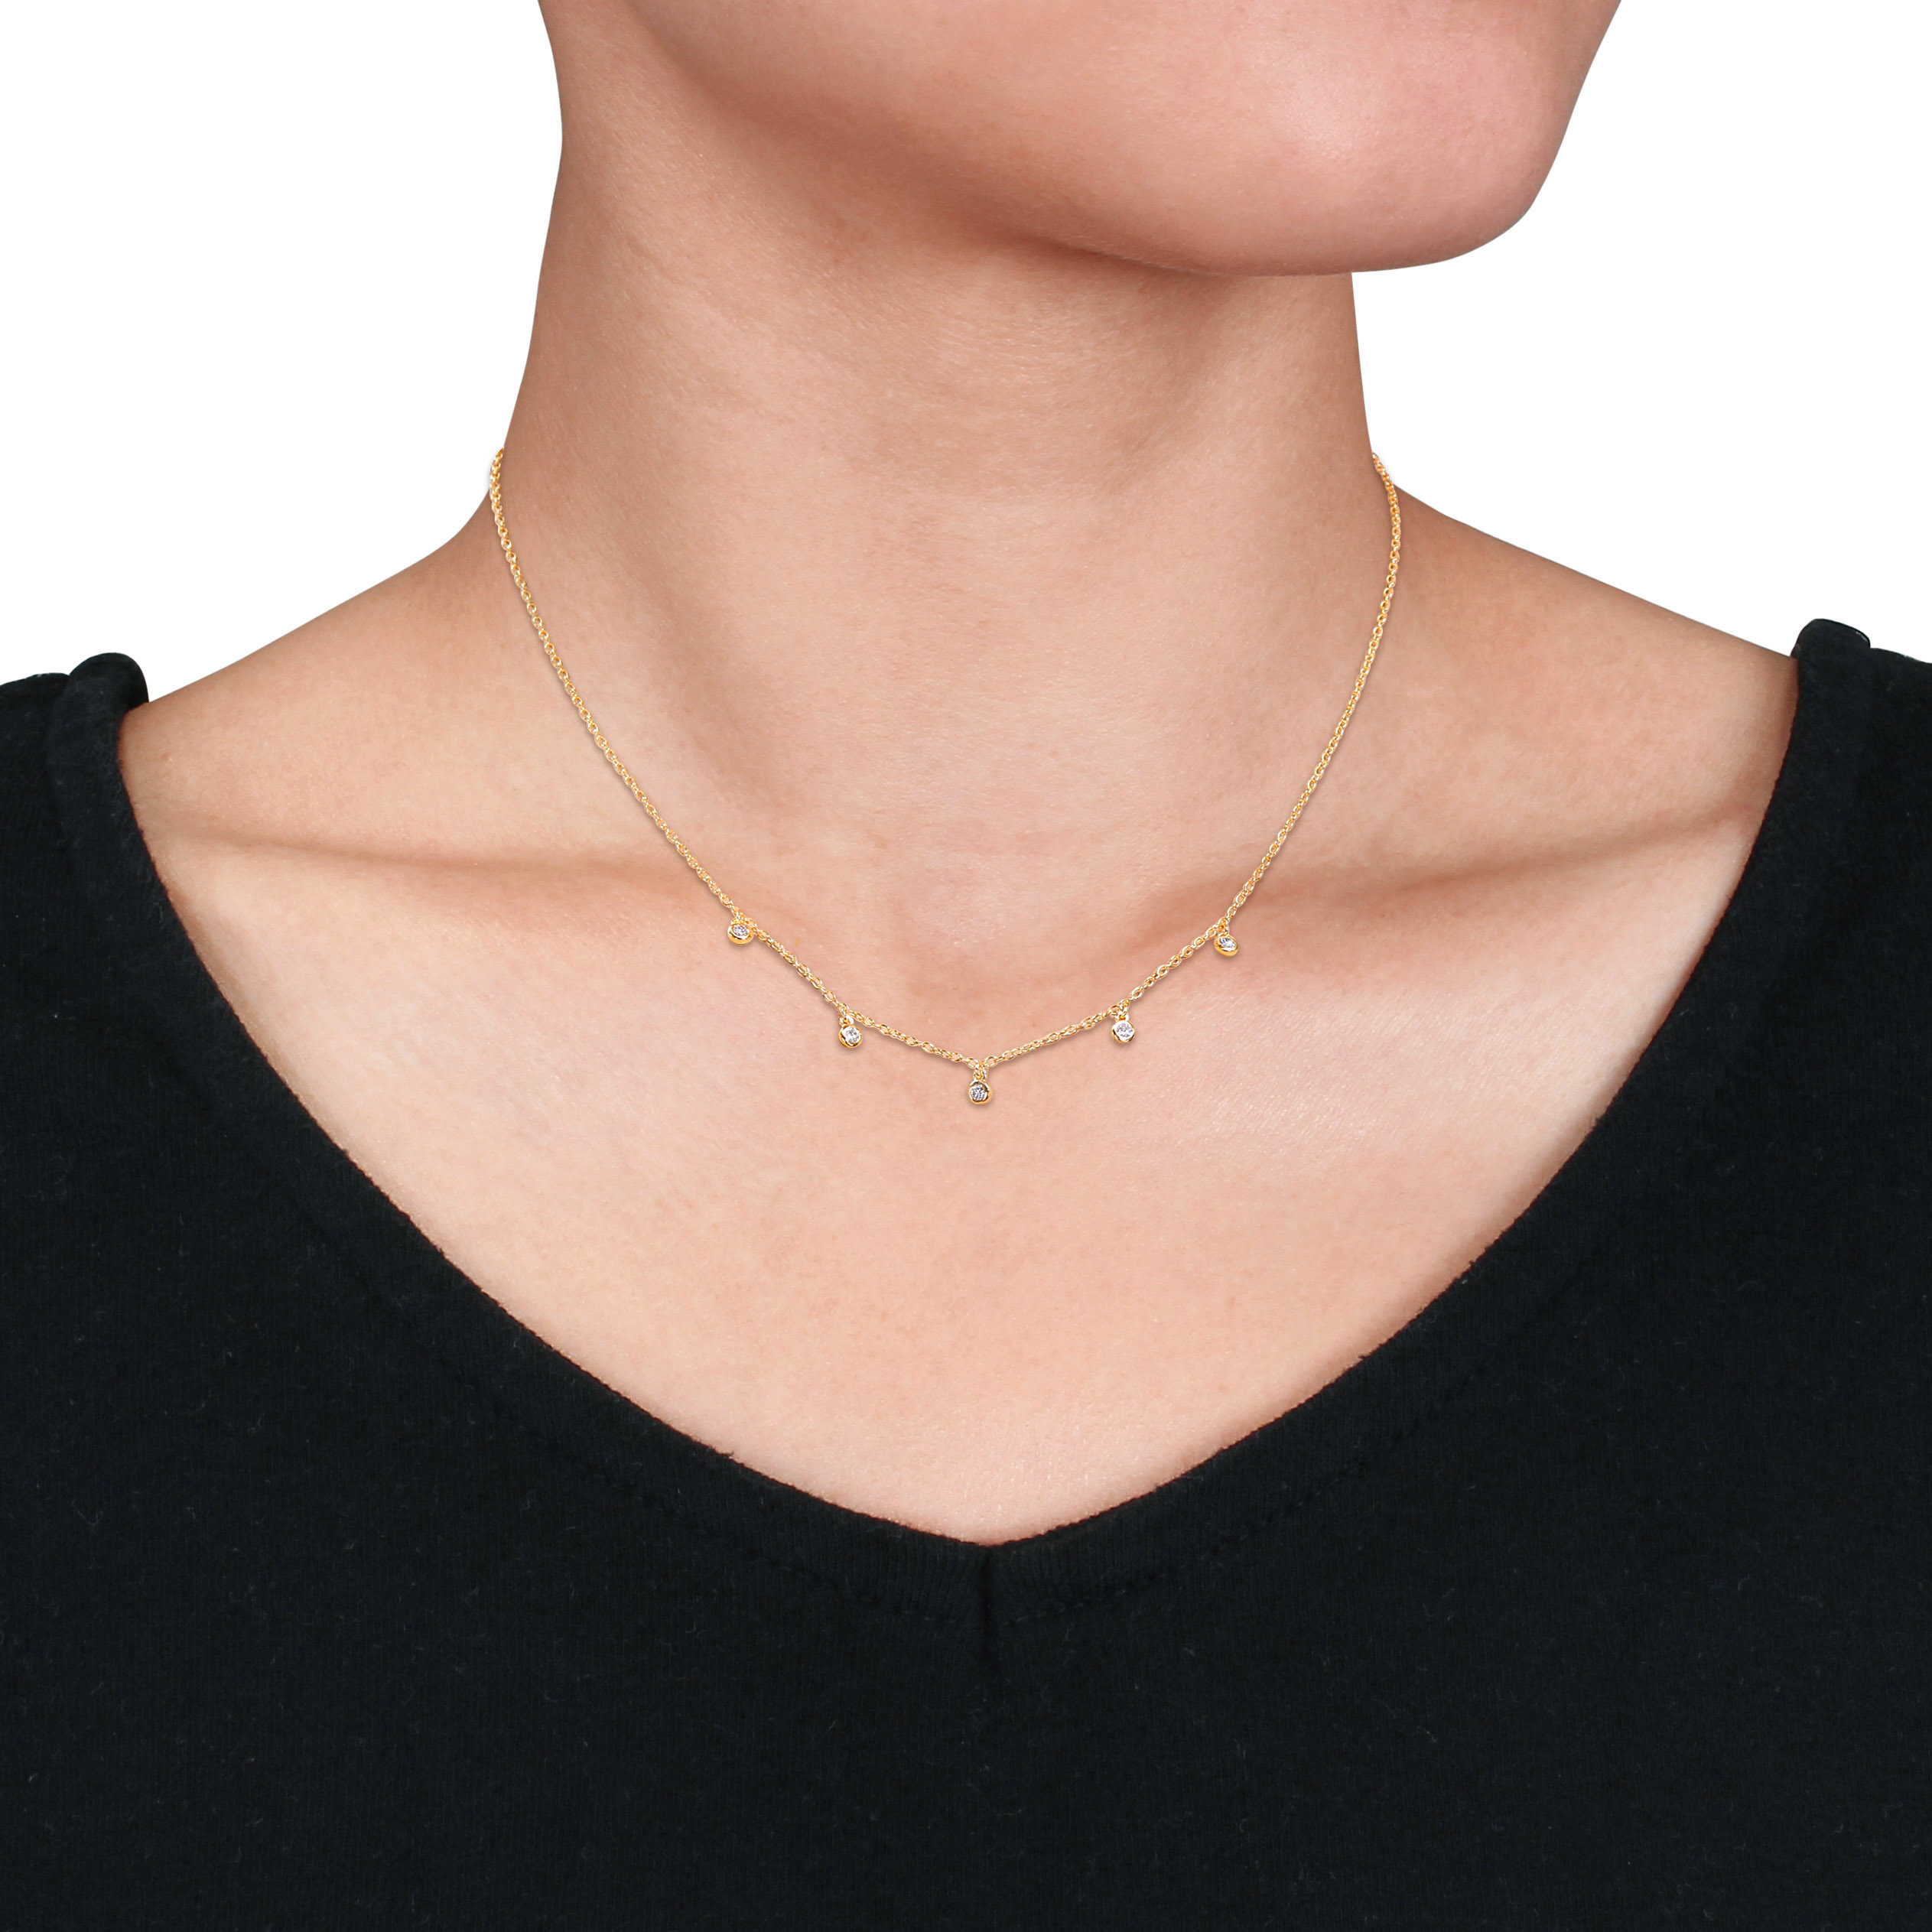 1/6 CT TGW Lab Created Diamond Station Necklace in 18k Yellow Gold Plated Sterling Silver - 16 in.